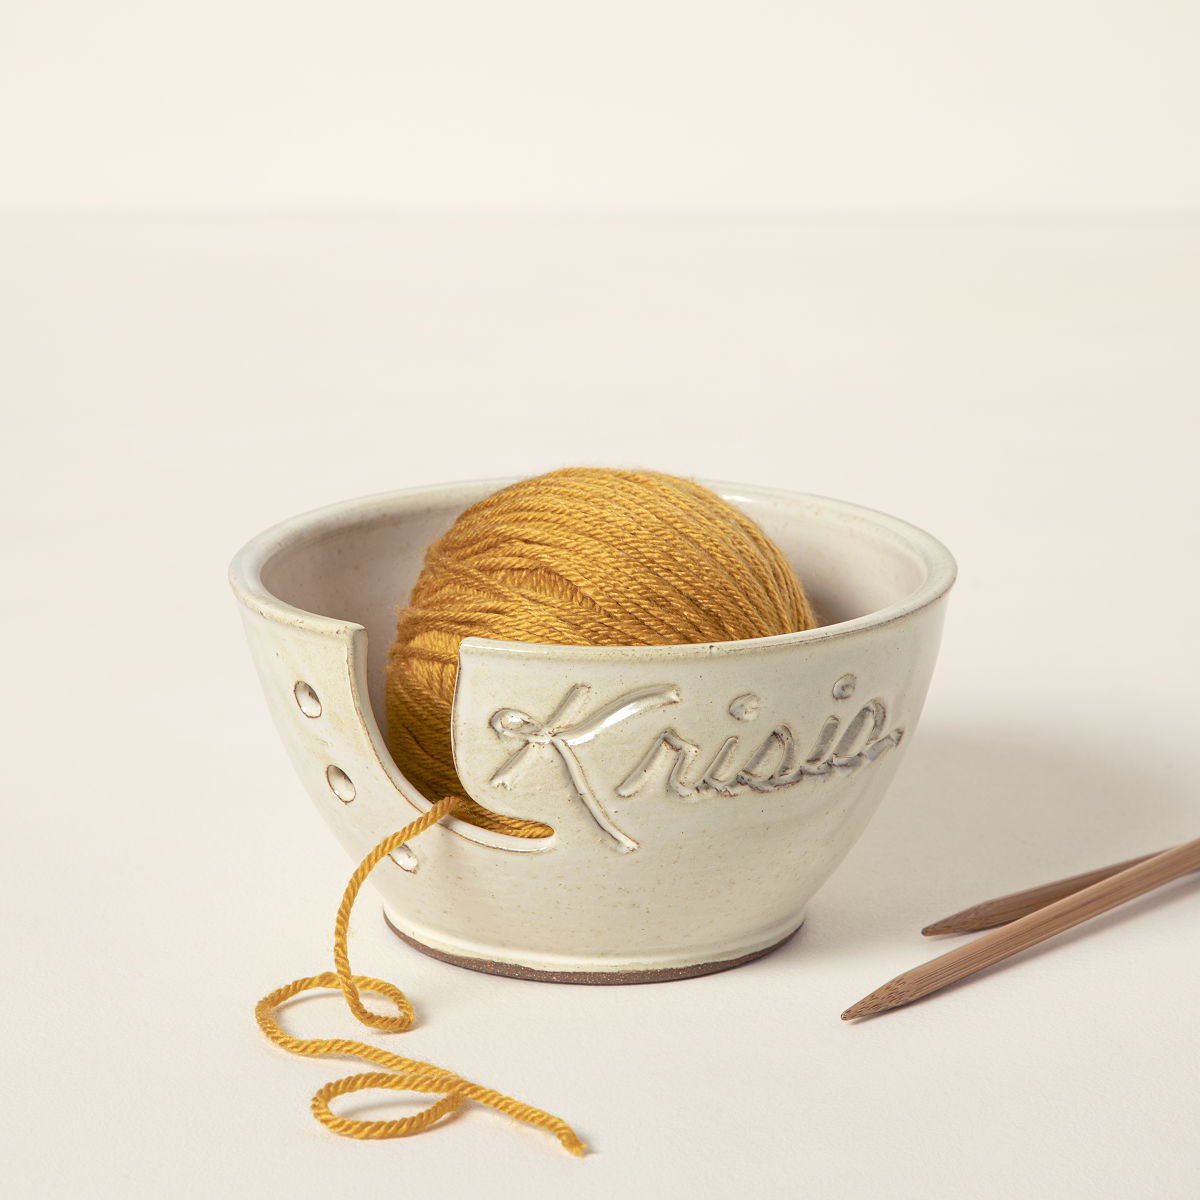 20 Best Gifts for Knitters - Knitting Gift Ideas for Beginners and